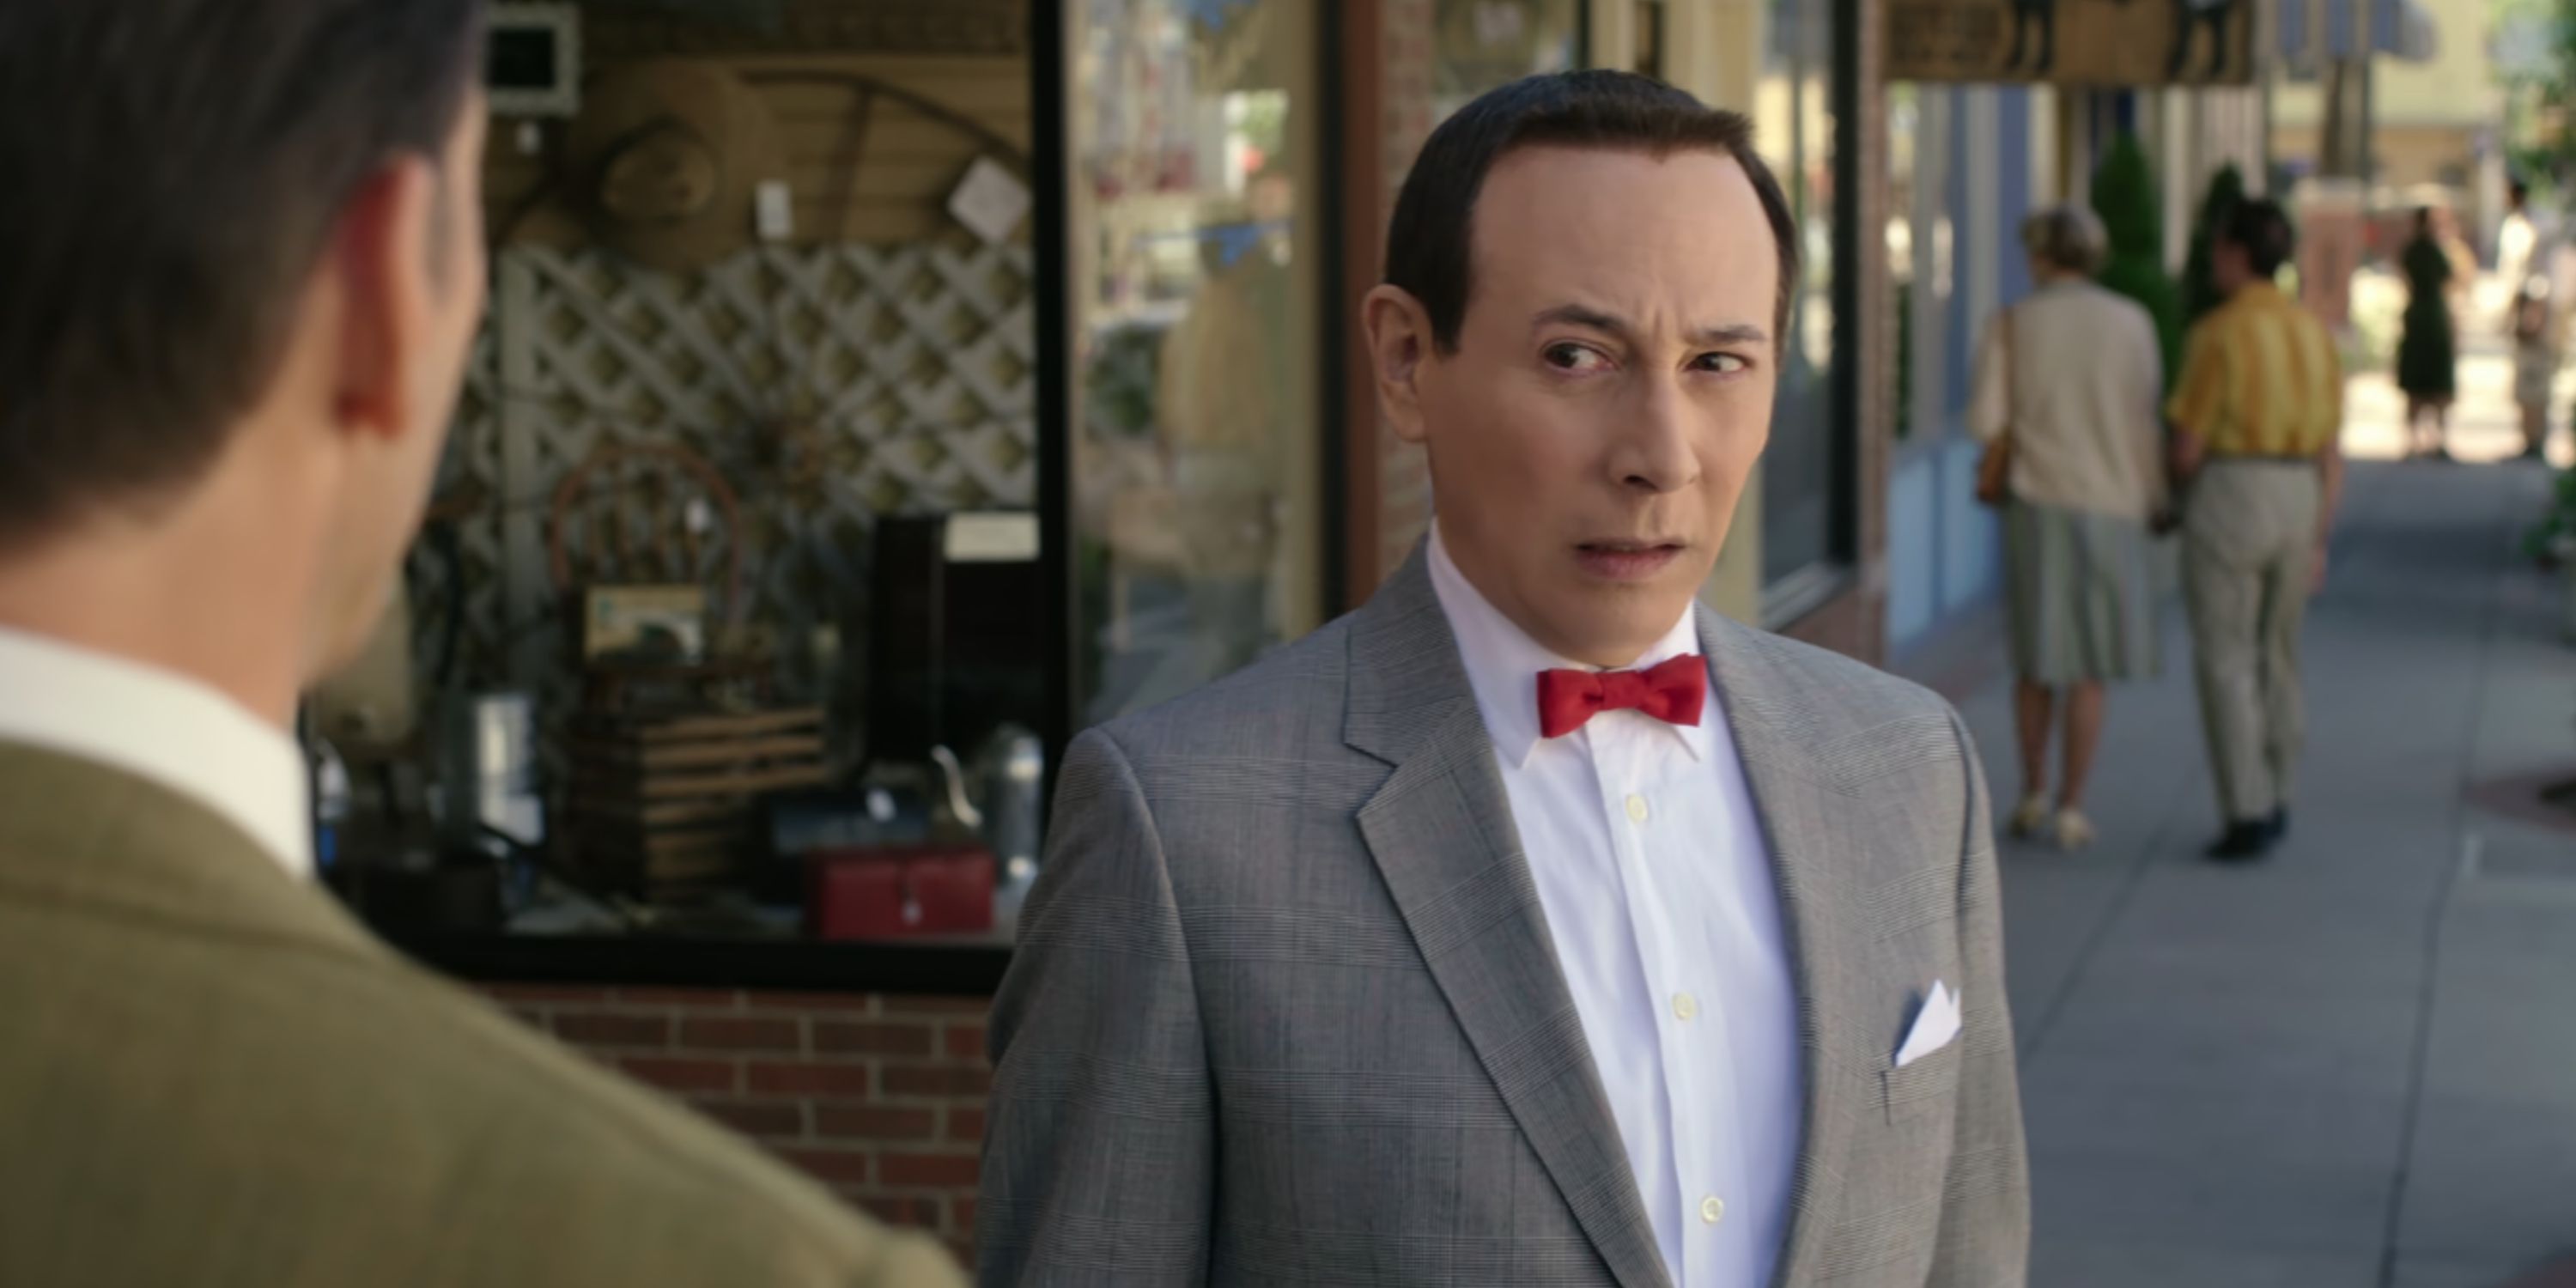 Paul Reubens as Pee-wee Herman, a man in a suit and bowtie in 'Pee-wee's Big Holiday'